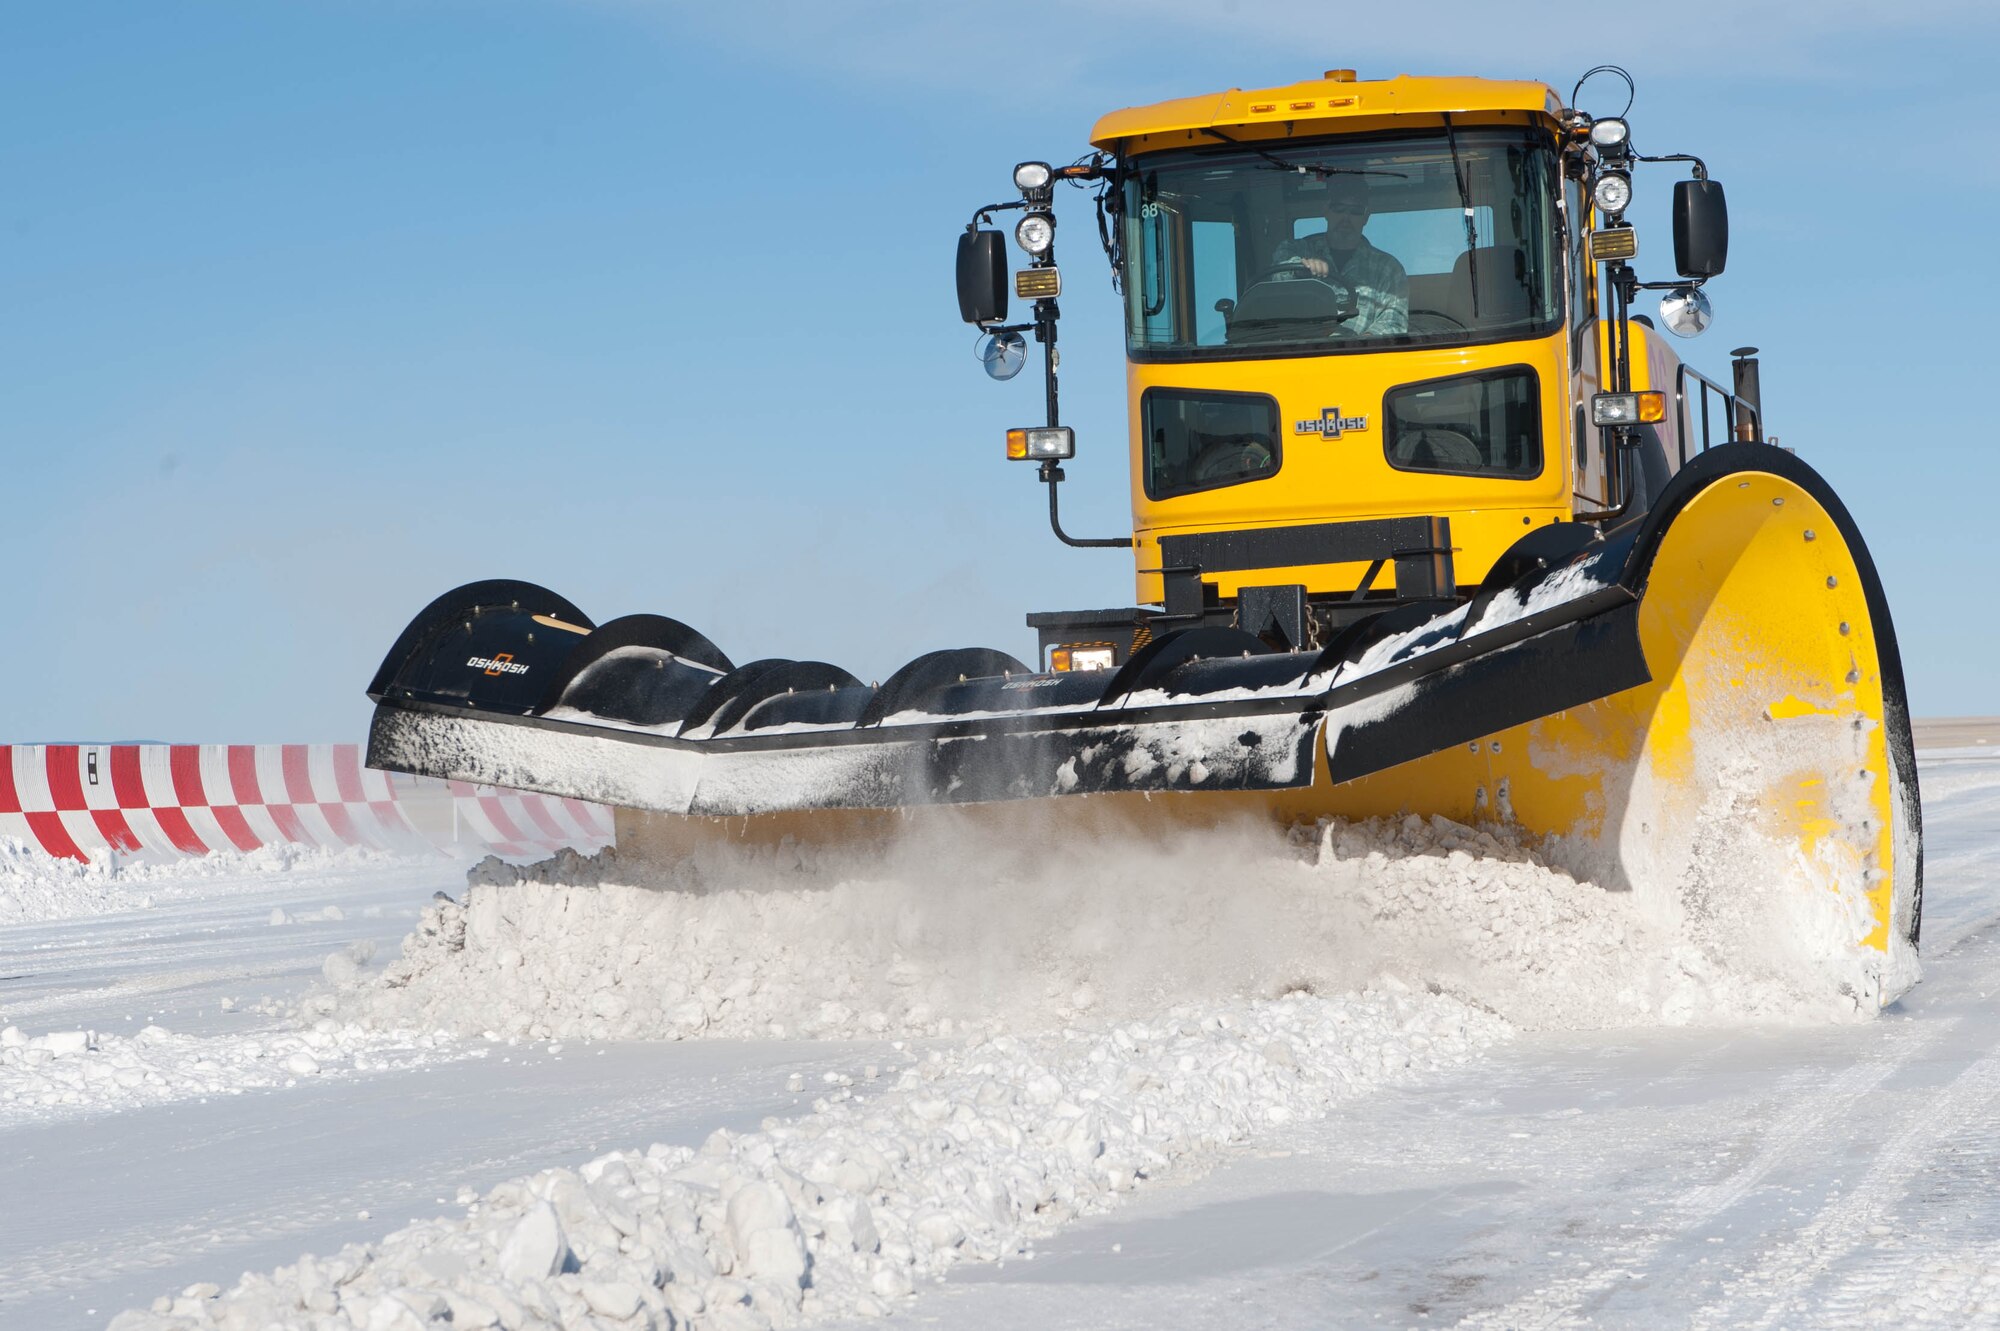 Kevin Holman, 28th Civil Engineer Squadron heavy equipment operator, clears the runway at Ellsworth Air Force Base, S.D., Feb. 29, 2012. The flightline is carefully plowed to ensure flightline operations are uninterrupted. (U.S. Air Force photo by Airman 1st Class Zachary Hada/Released)